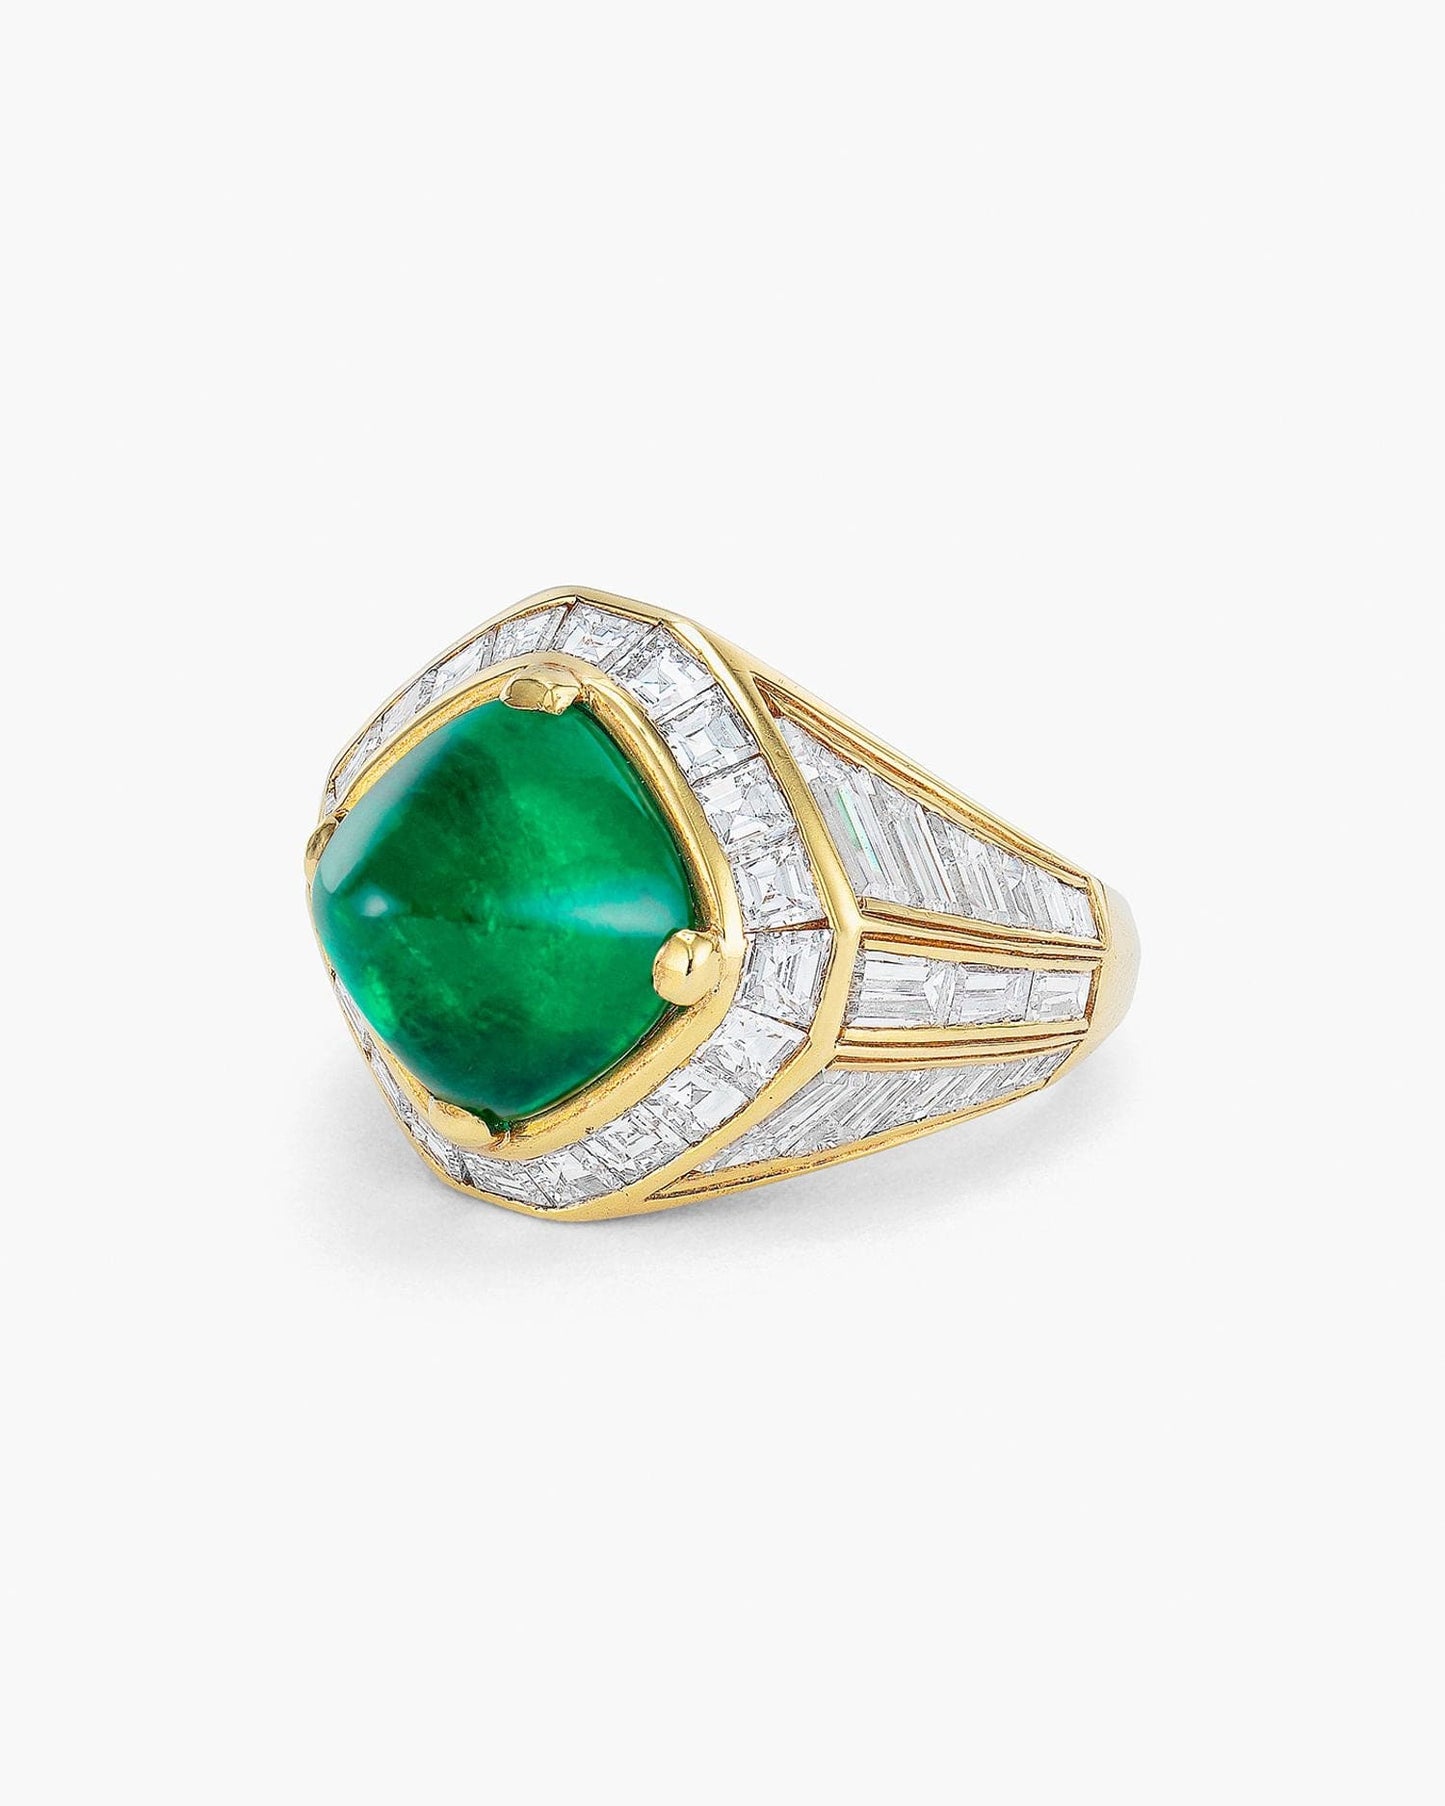 5.25 carat Sugar Loaf Colombian Emerald and Diamond Ring